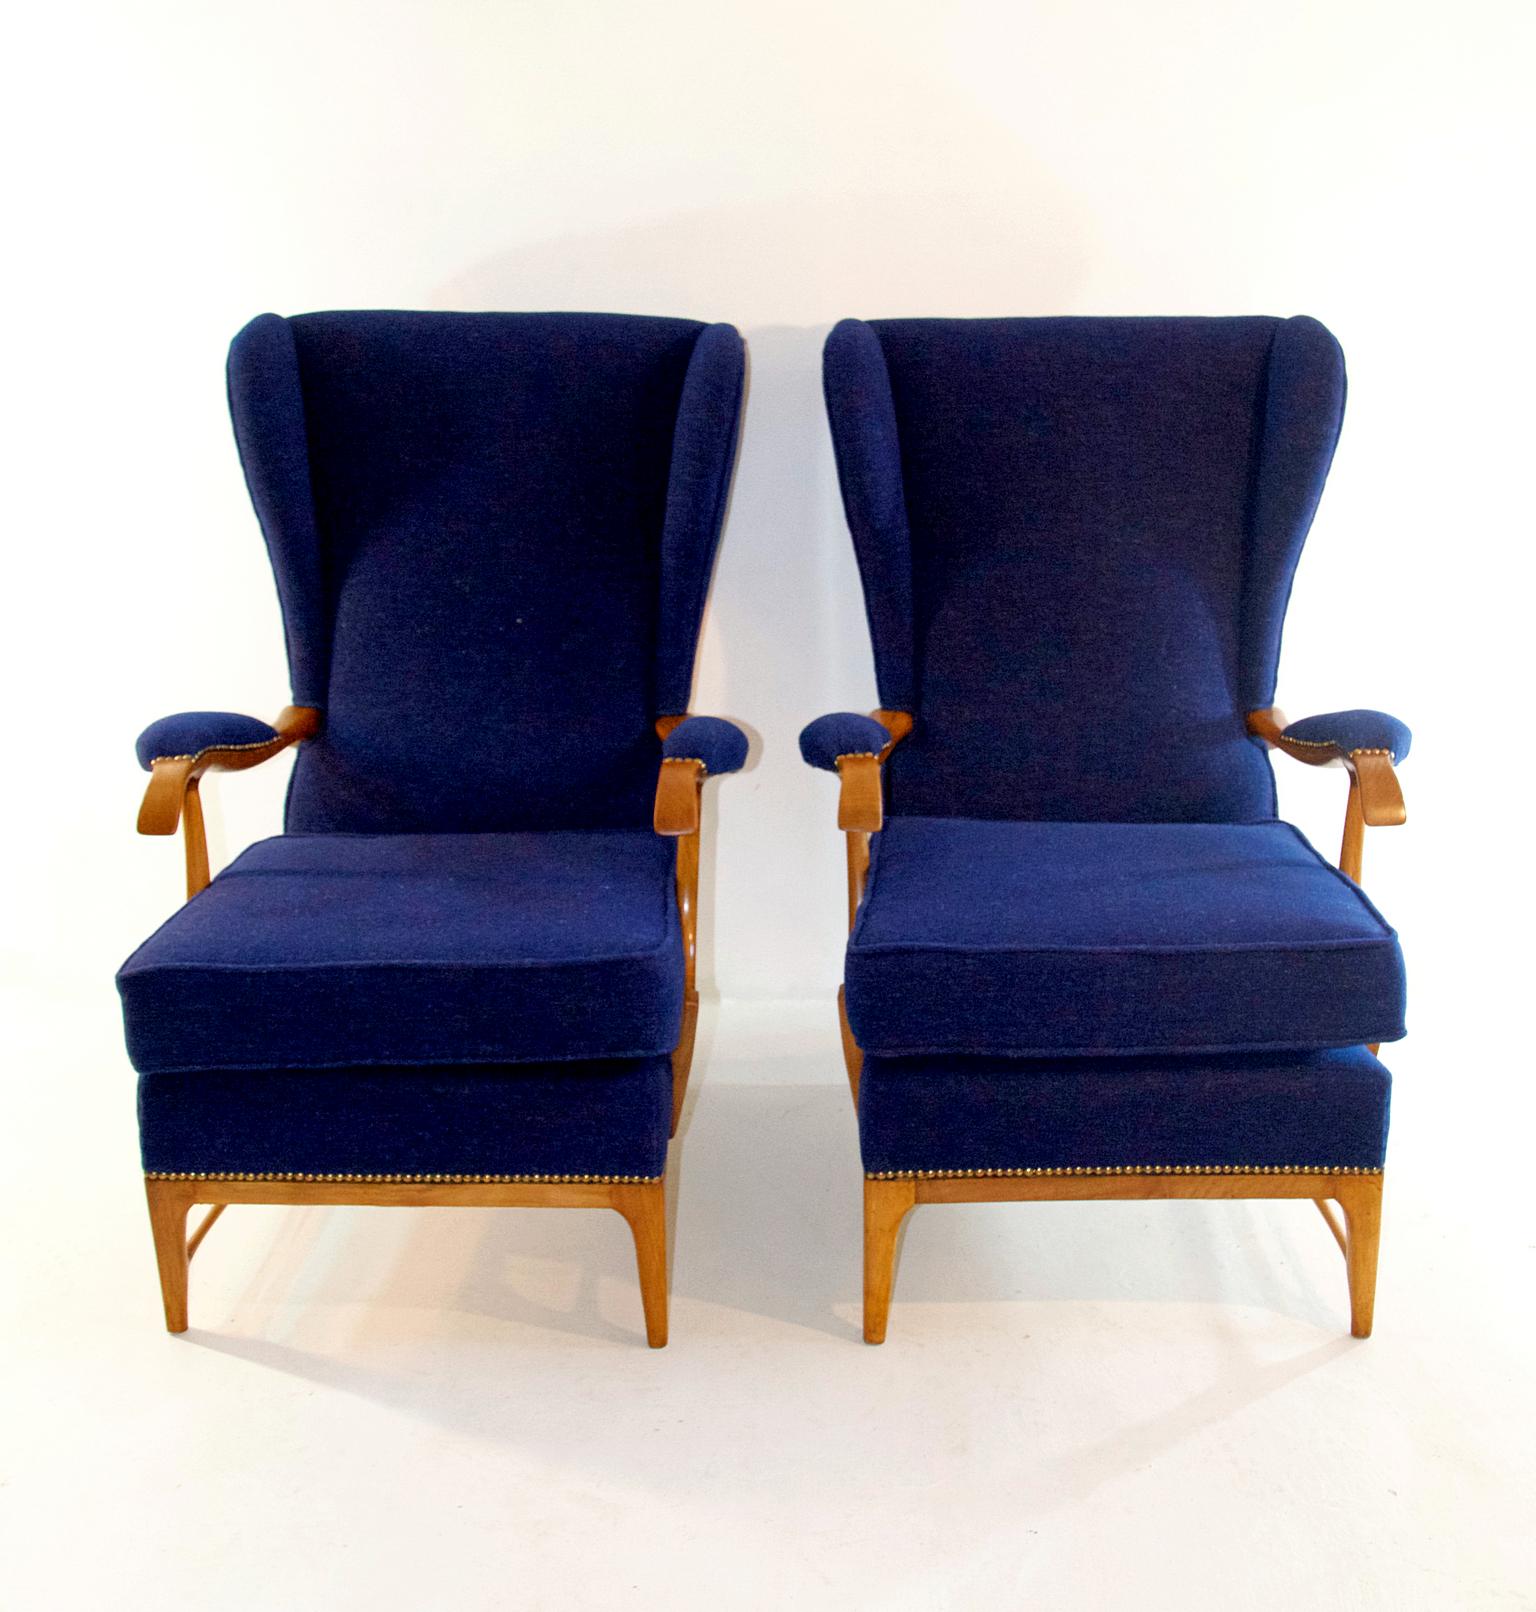 Mid-Century Modern Midcentury Pair of Armchairs in Walnut by Paolo Buffa for Framar Made in Italy For Sale